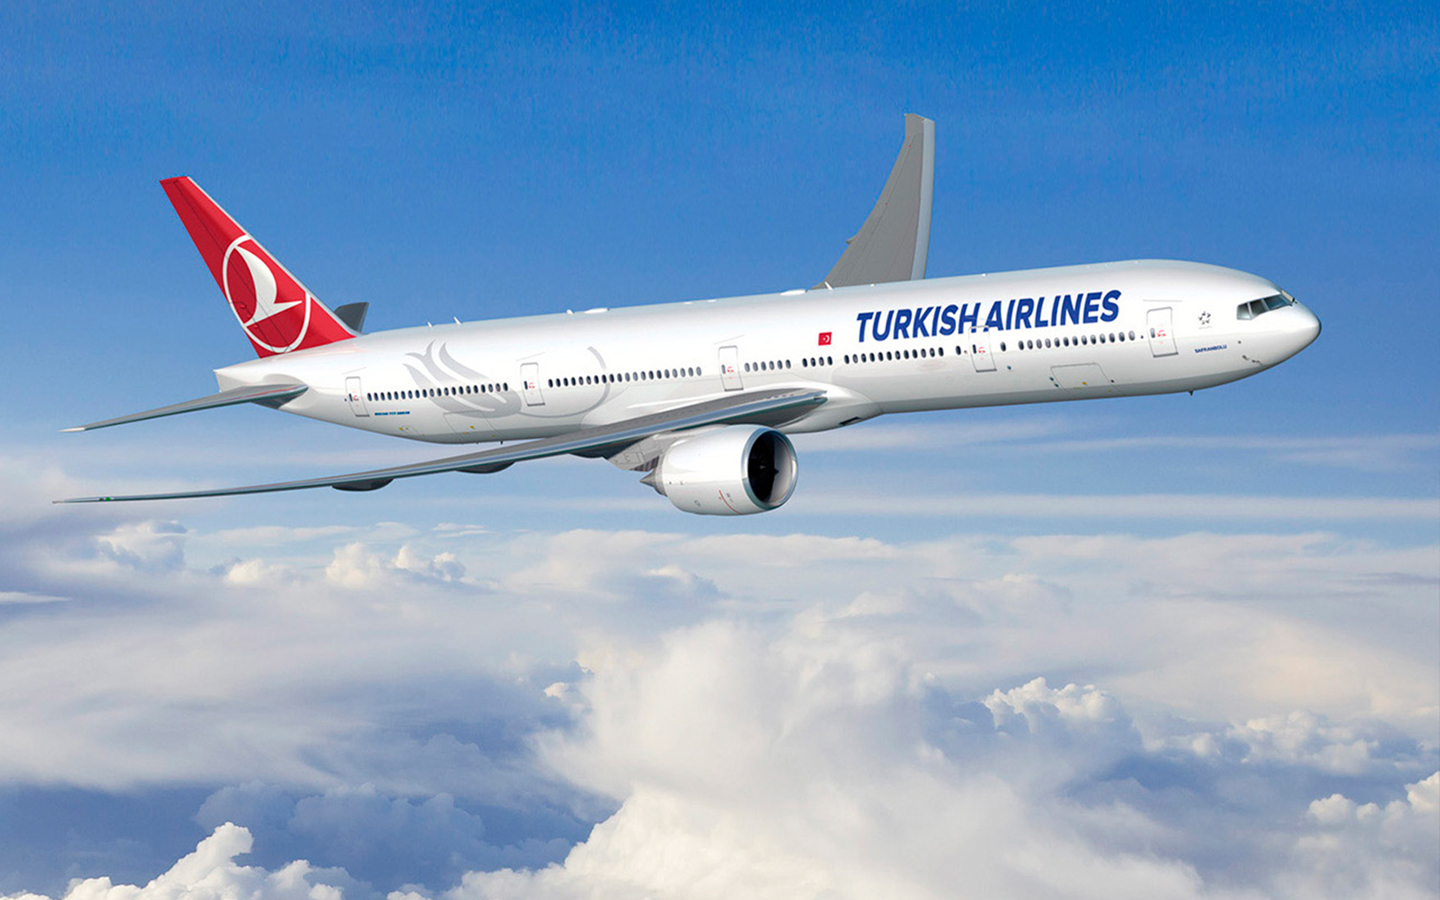 6 Reasons to Fly with Turkish Airlines